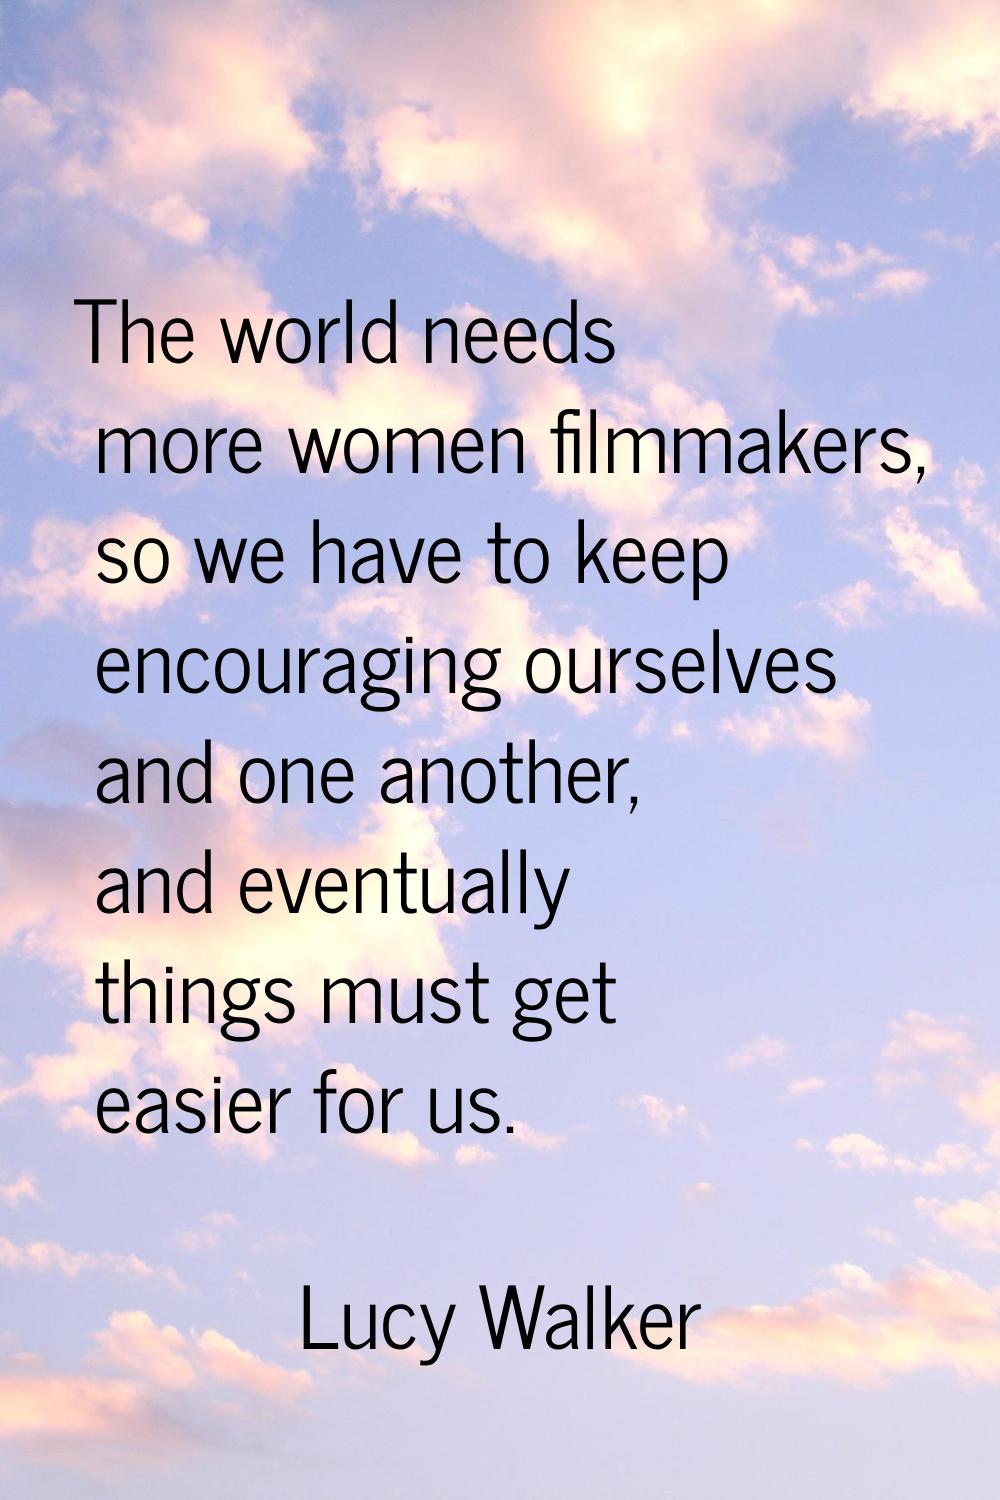 The world needs more women filmmakers, so we have to keep encouraging ourselves and one another, an